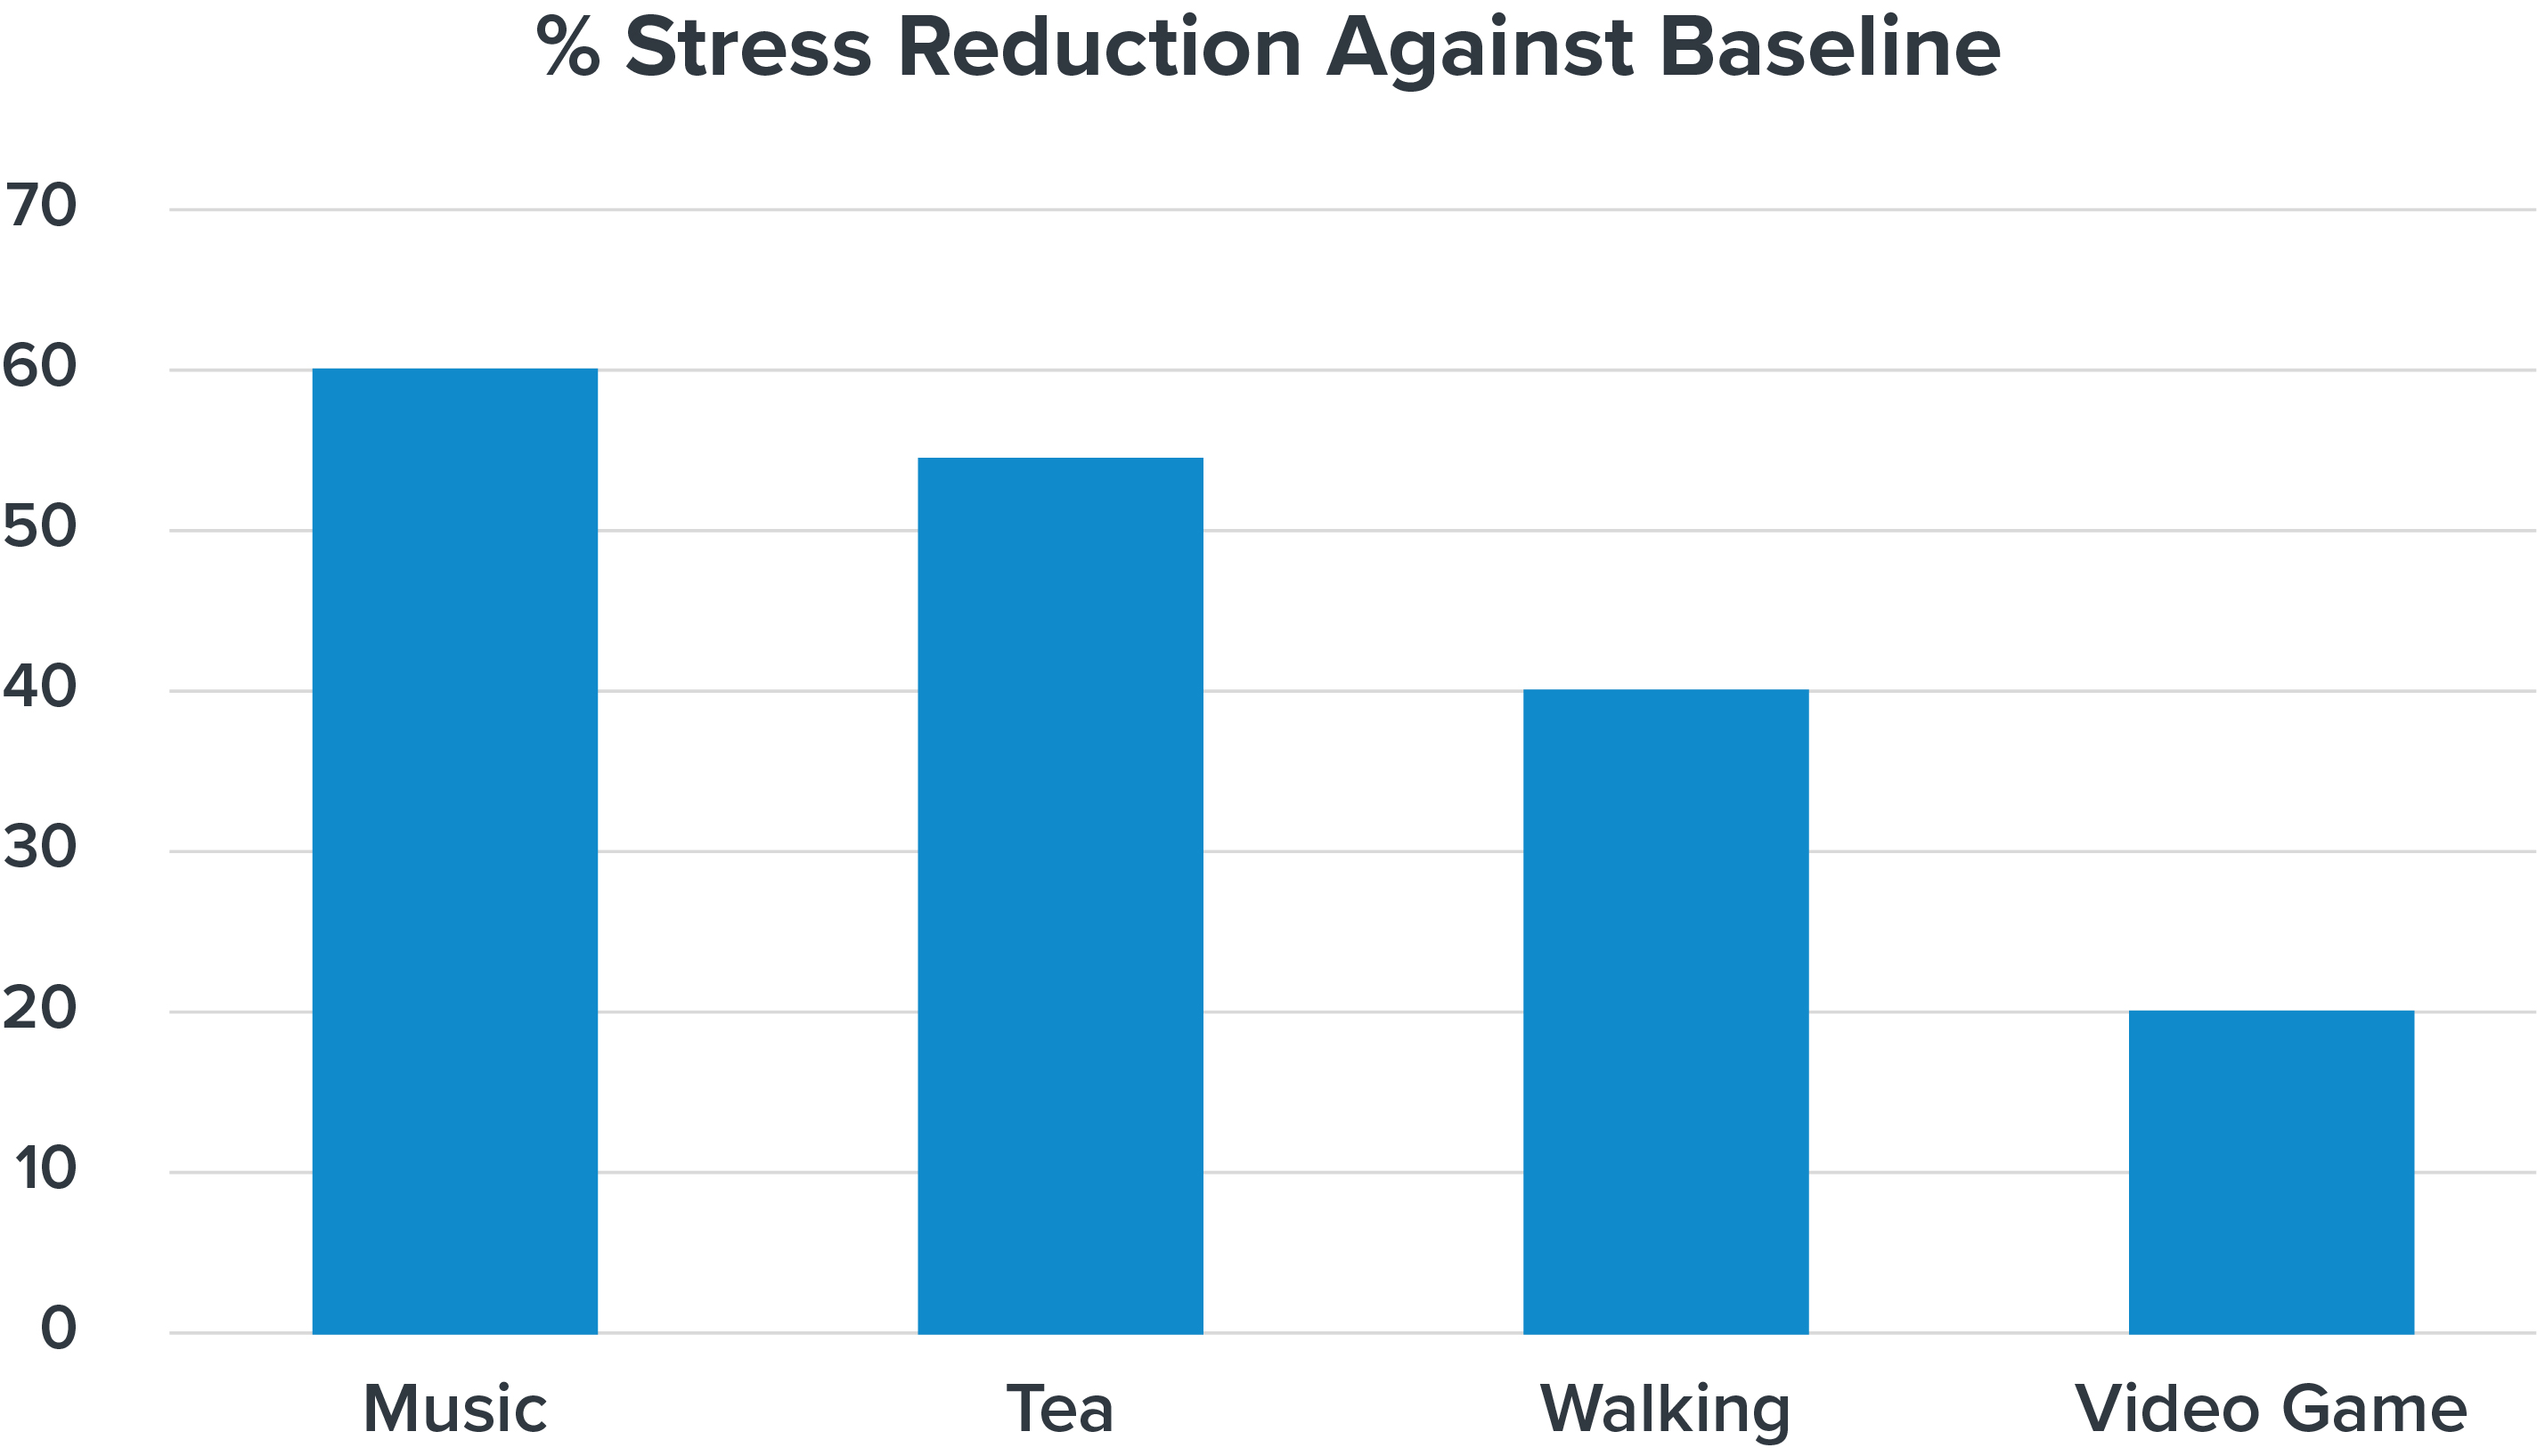 A bar chart showing how much stress is reduced percentage-wise when a person performs various activities, with listening to music being the most relaxing, followed by drinking tea, walking, and playing video games.